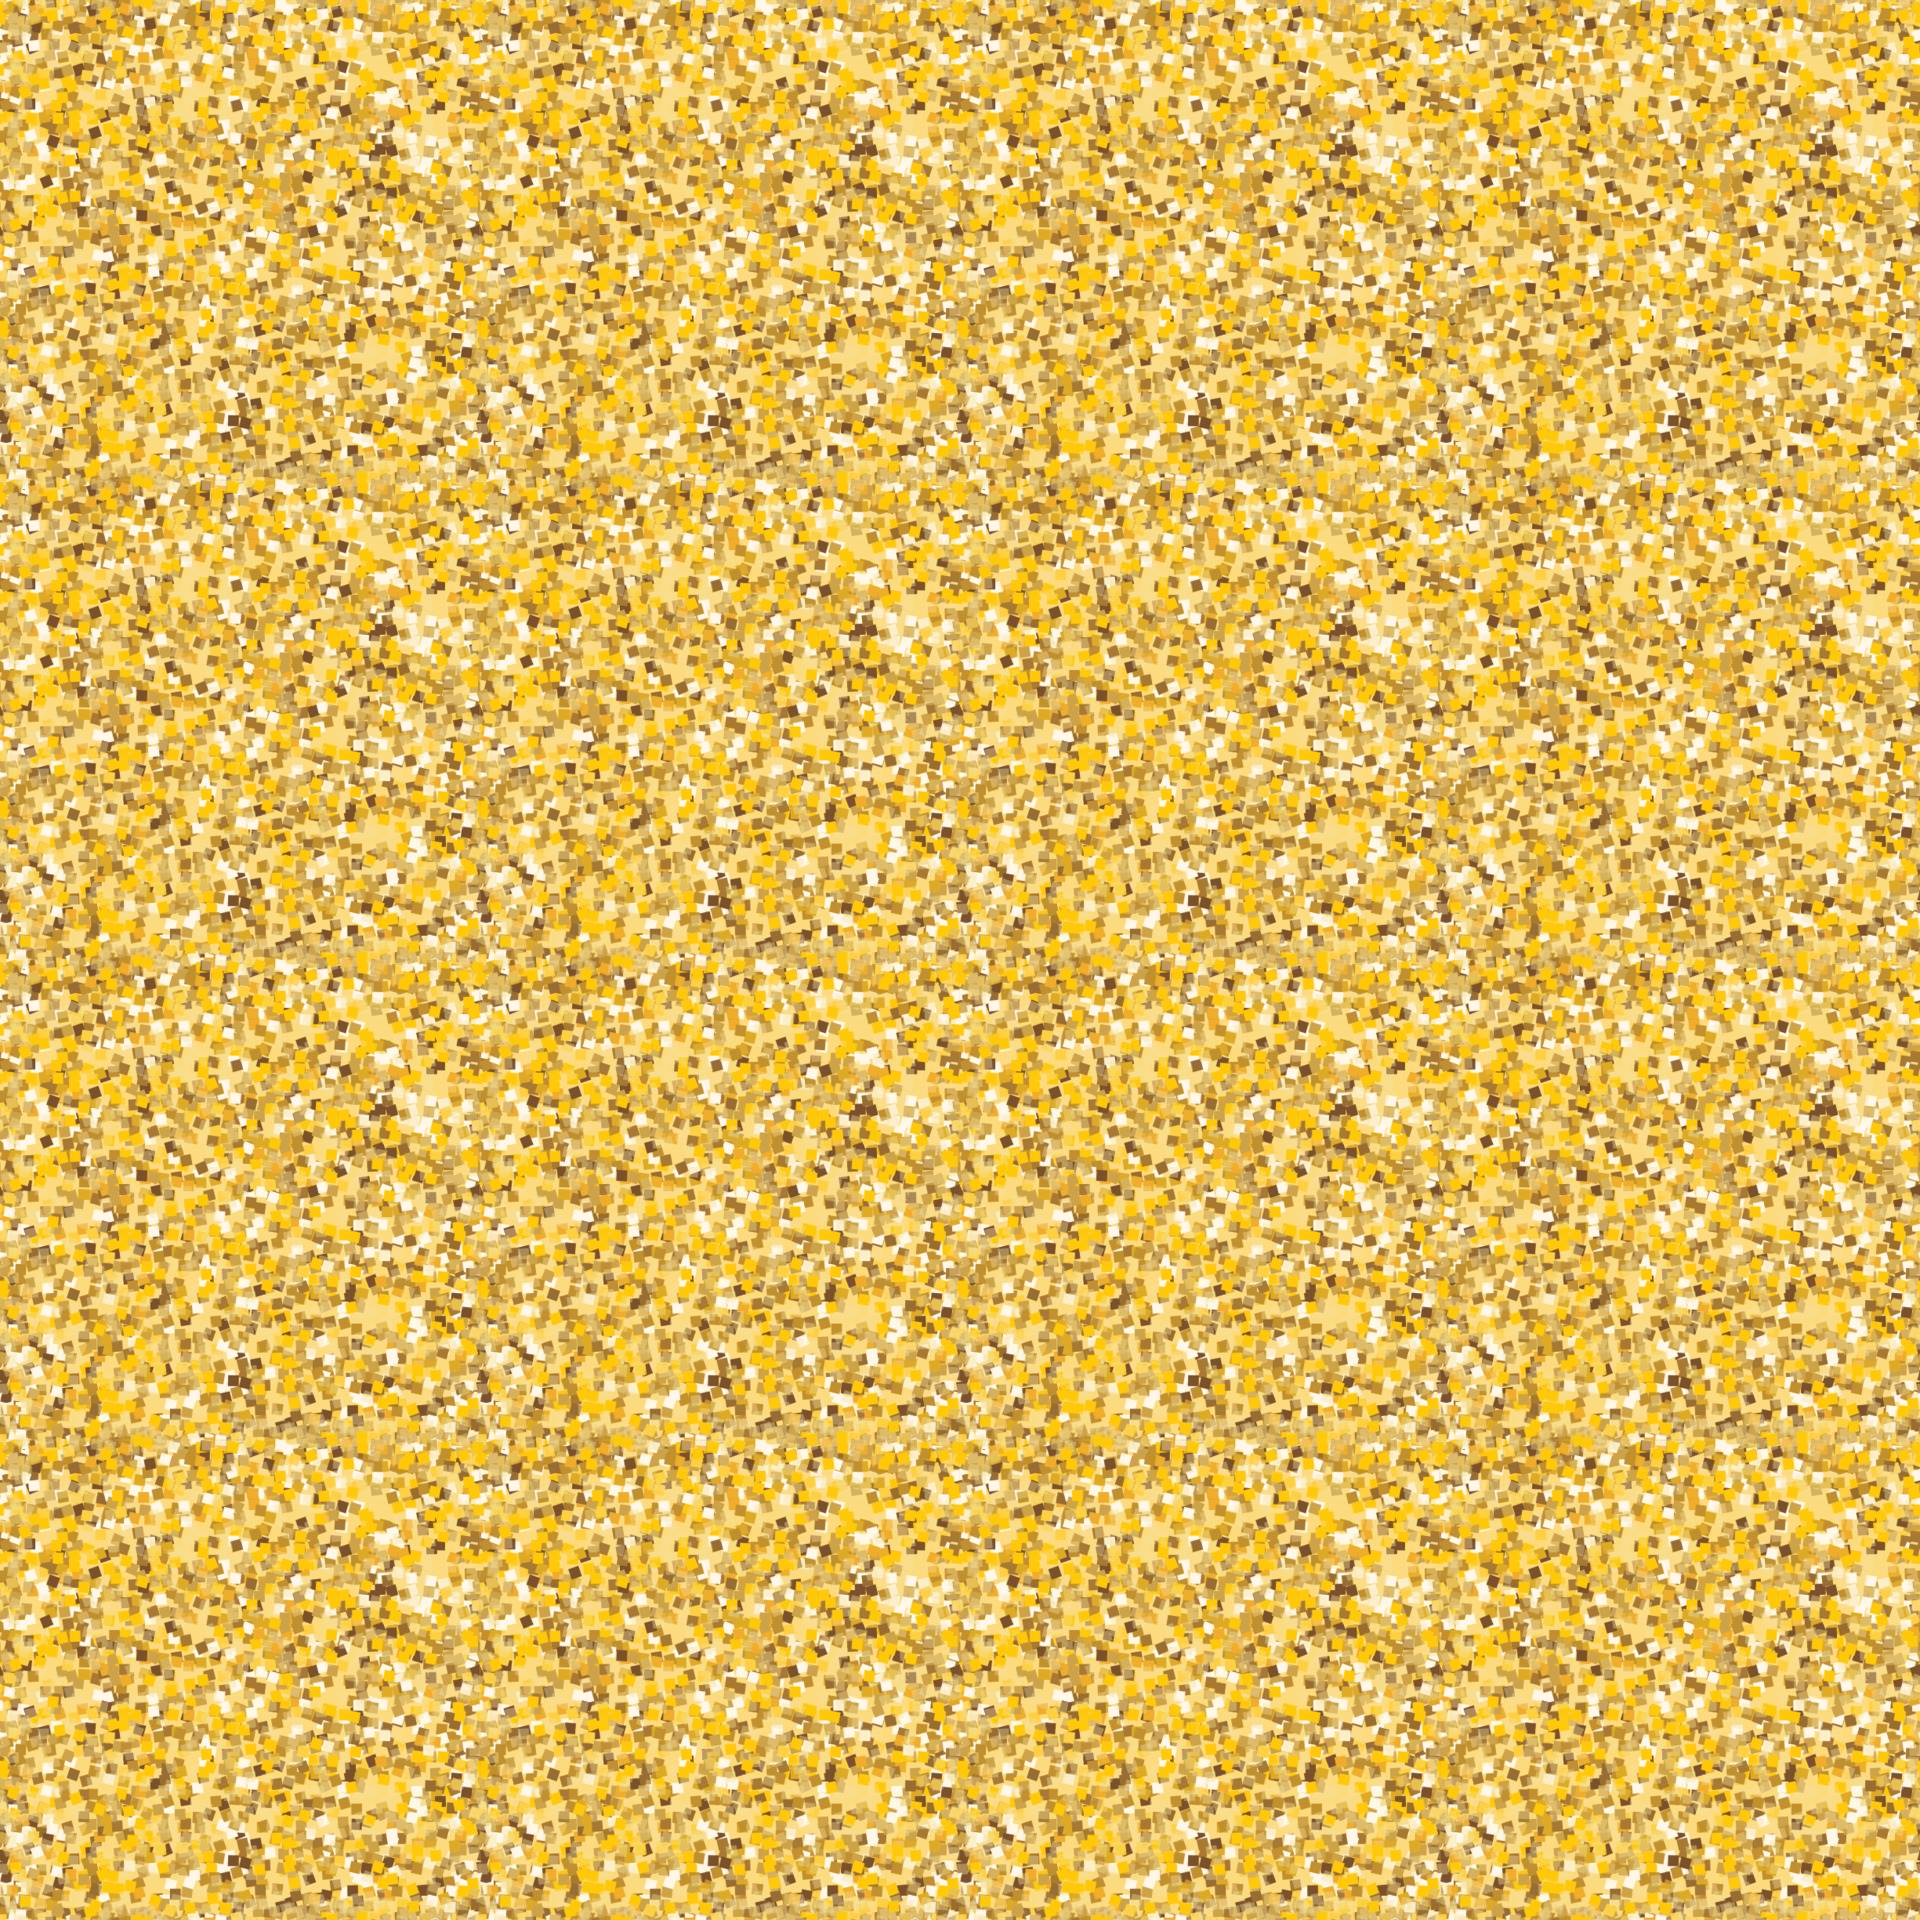 Golden Shiny Glossy Texture. Repeat Structure. Seamless Pattern